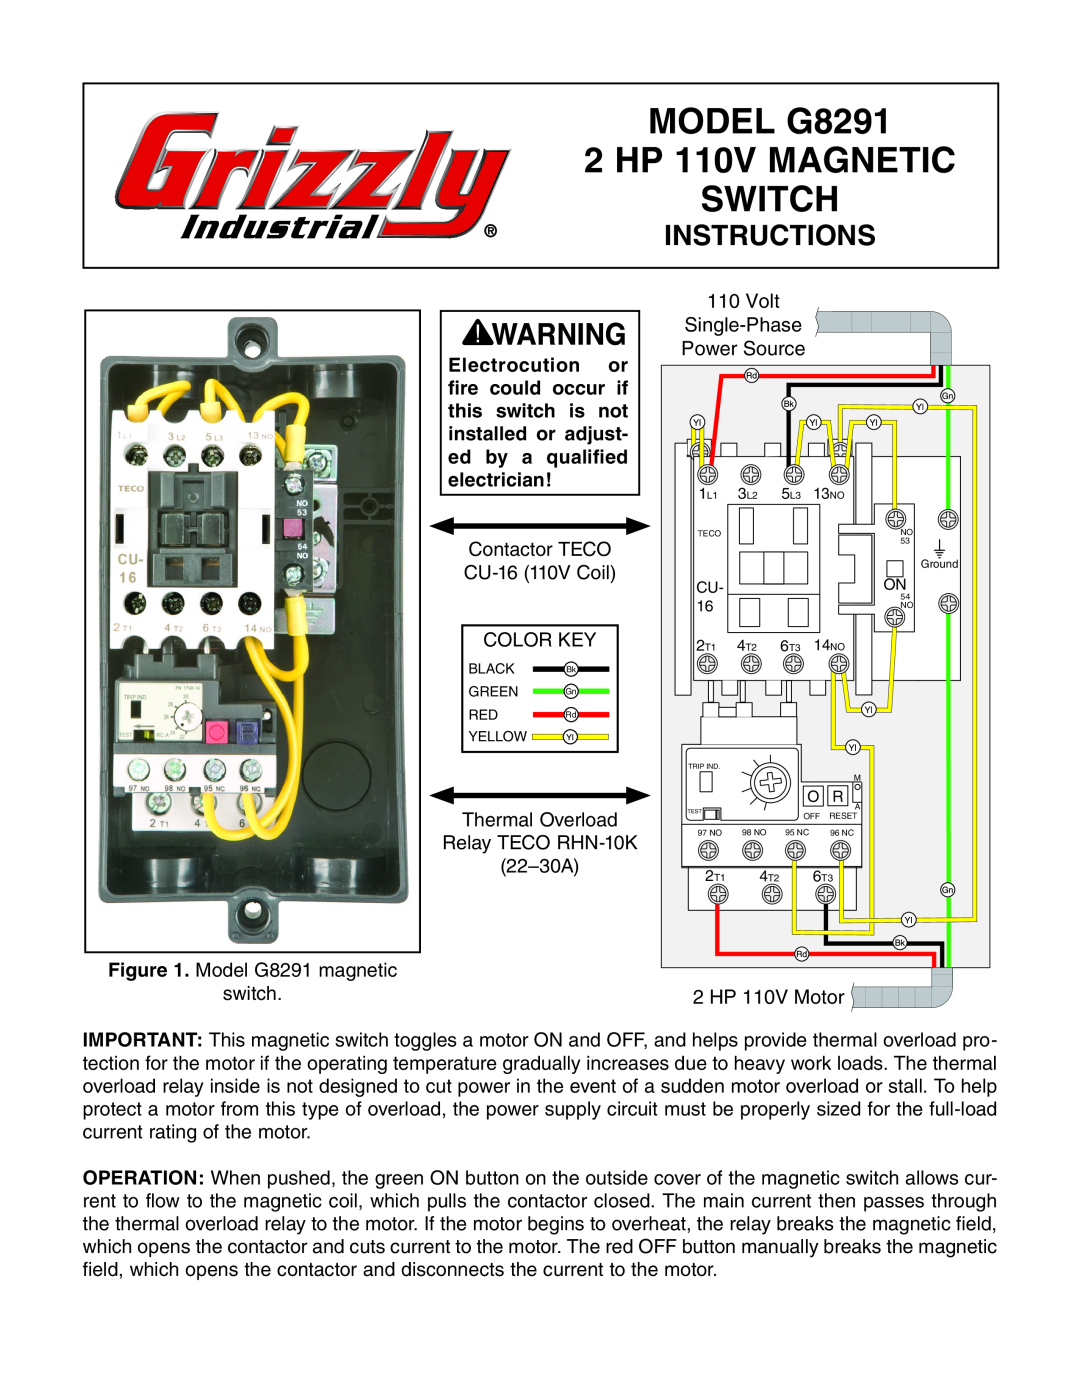 Grizzly manual MODEL G8291 2 HP 110V MAGNETIC SWITCH, Instructions 